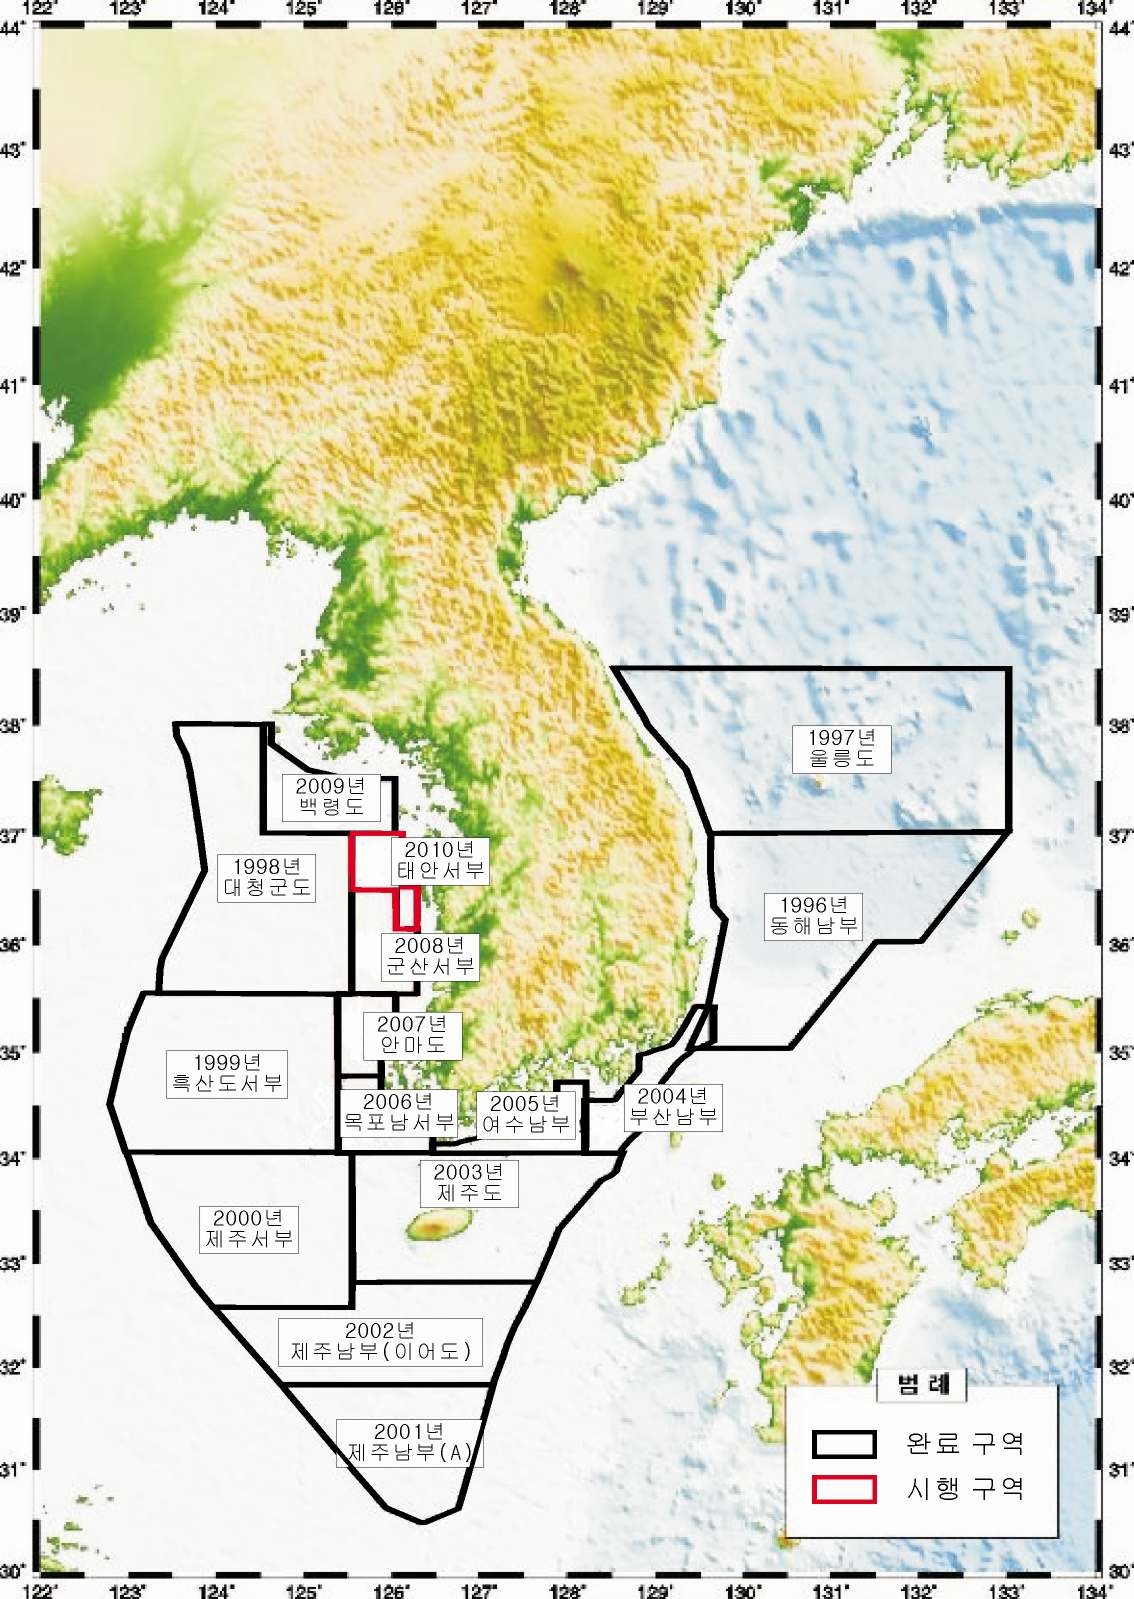 Areas for annual surveys of the Korean Hydrogrpahic and Oceanographic Administration